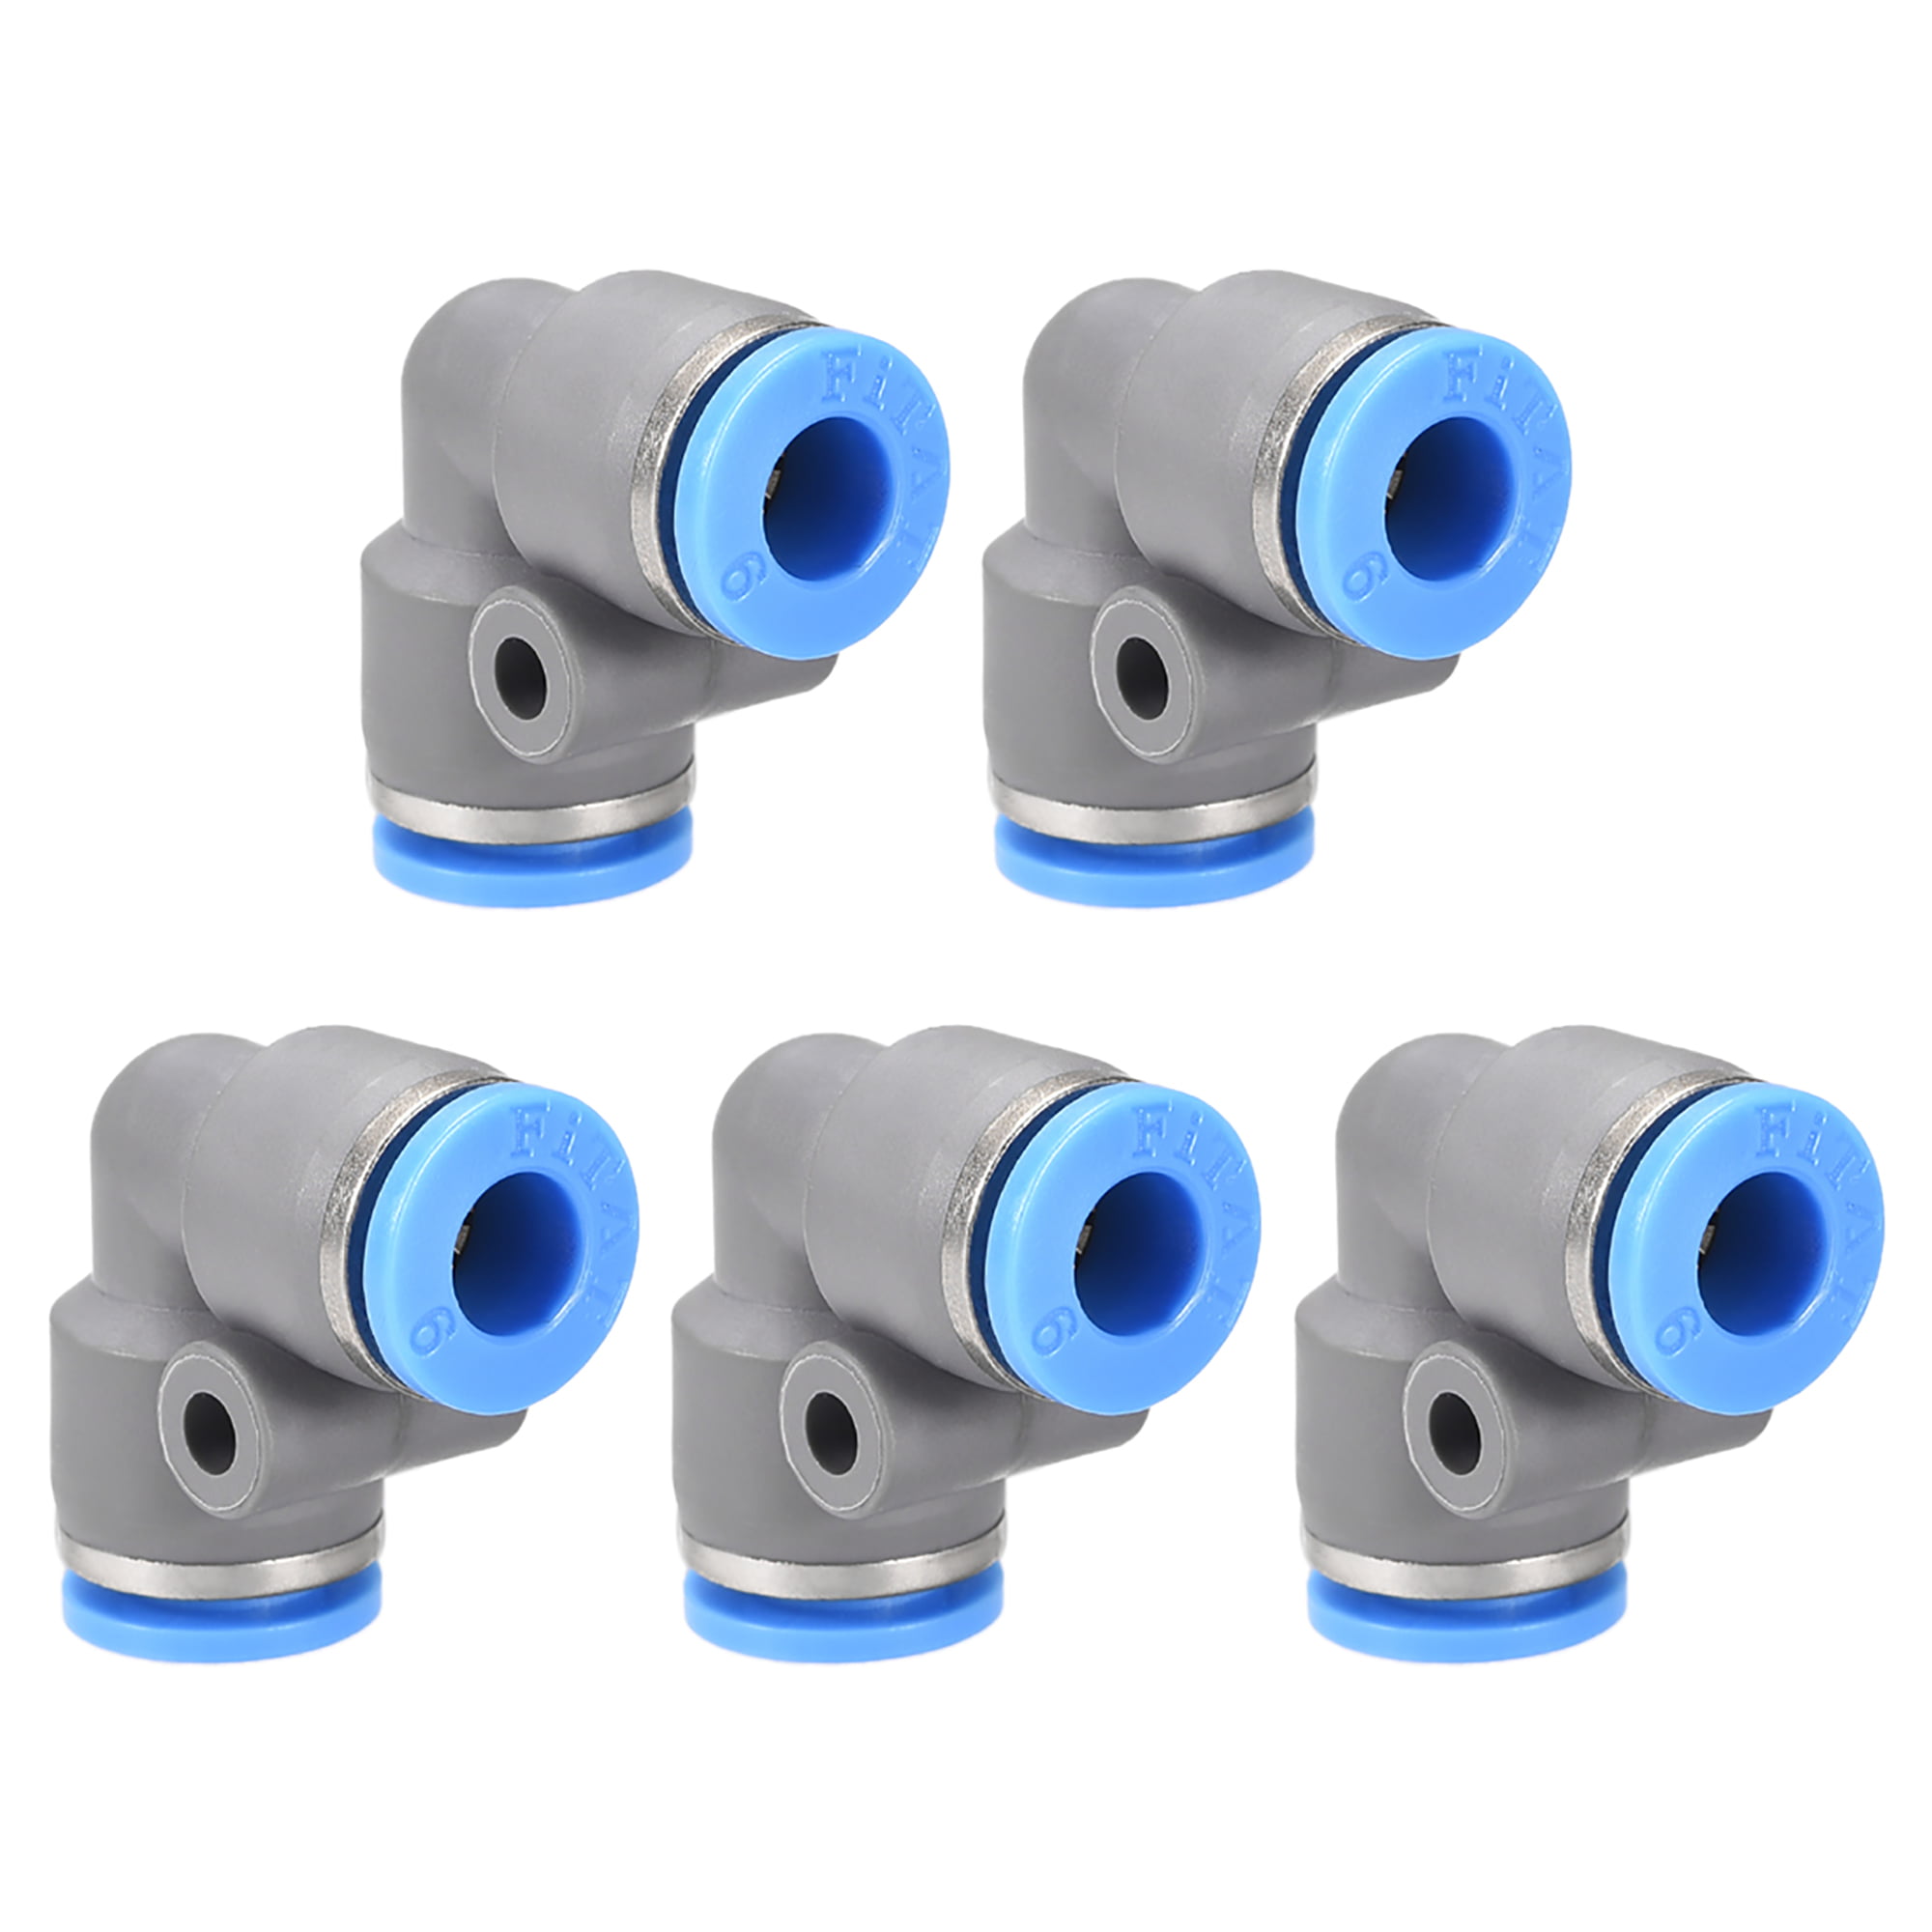 5pcs 6mm 1/4" Pneumatic 90 Degree Elbow Connector Hose Tube Push in Fitting Air 